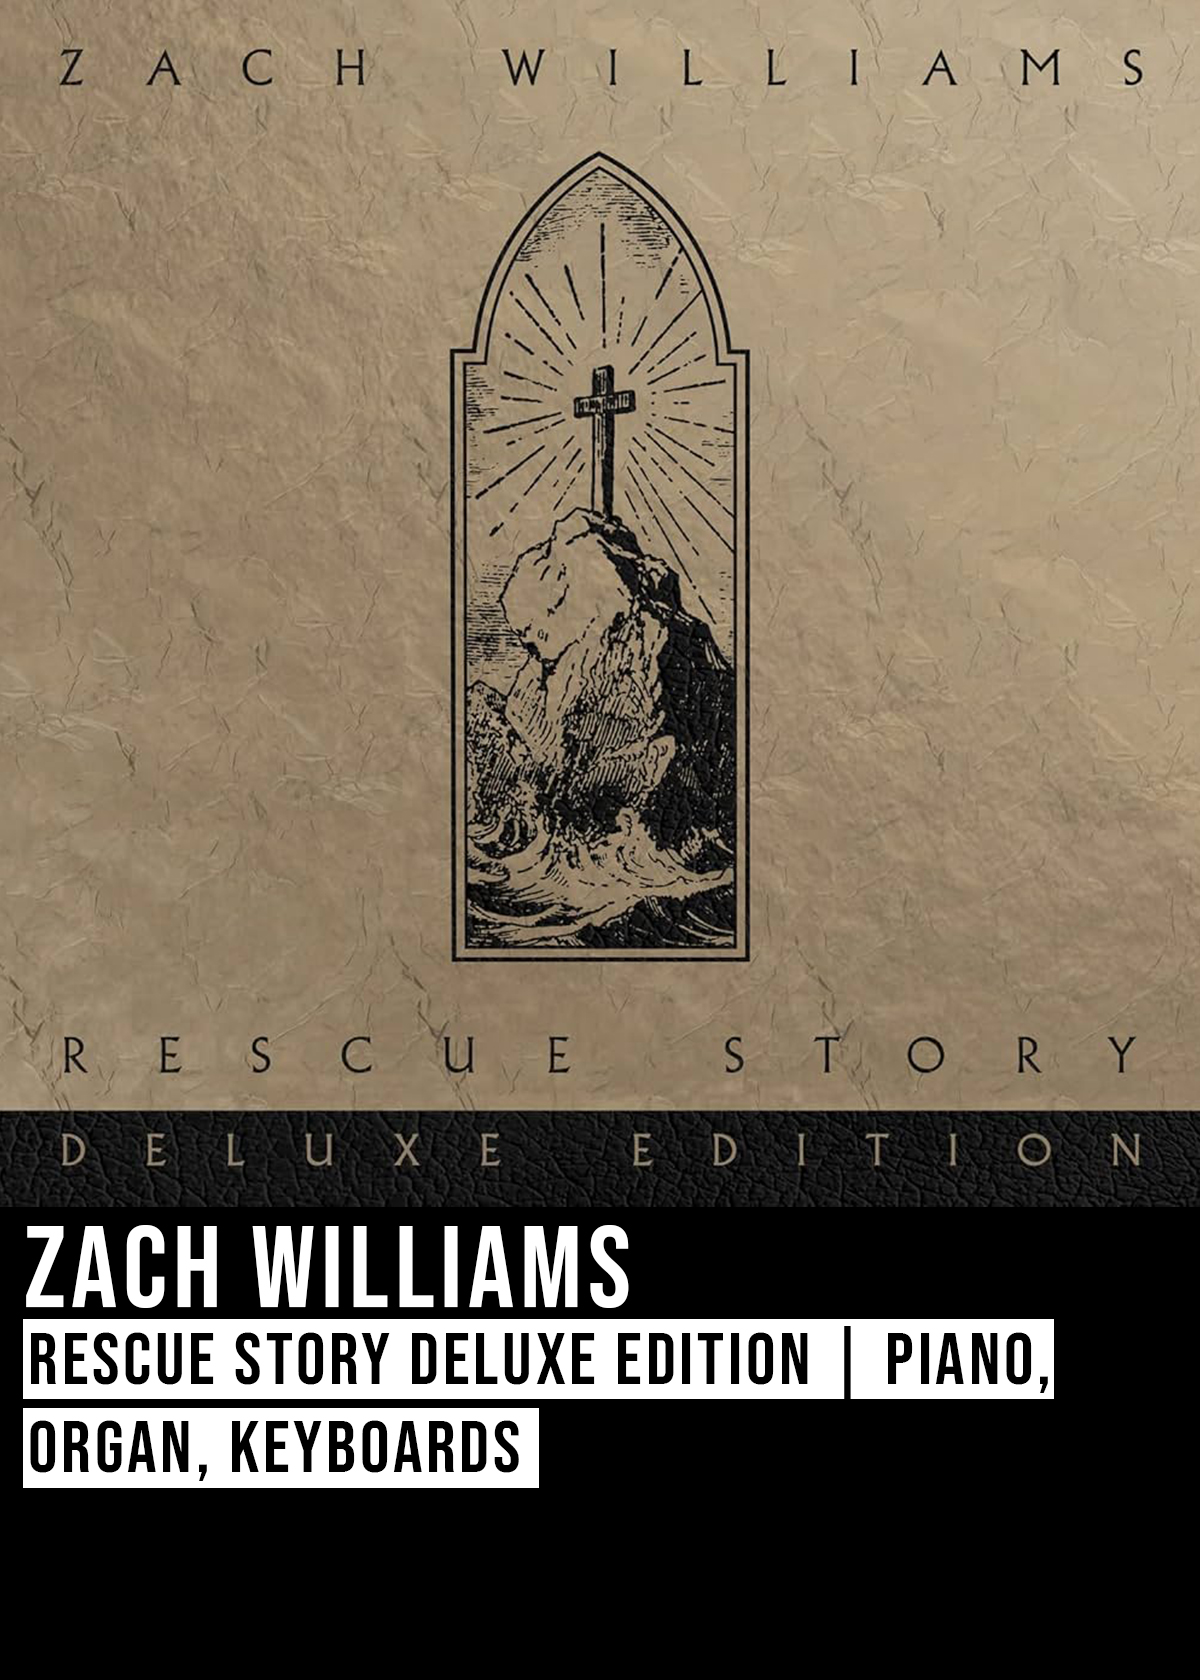 Zach Williams Rescue Story Don Eanes Organ PIano Keyboards